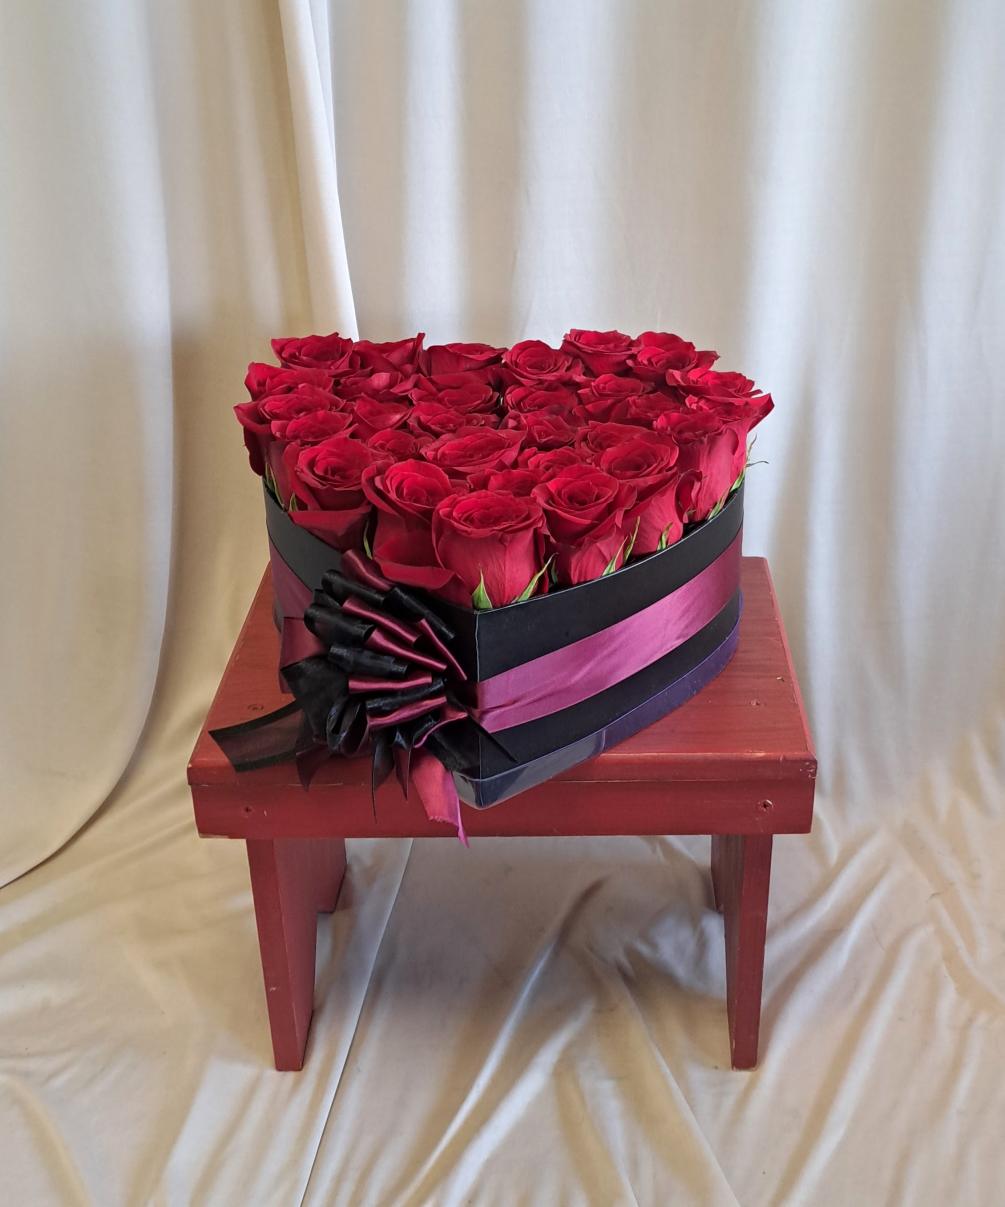 Darling box of red premium roses in a medium size box and